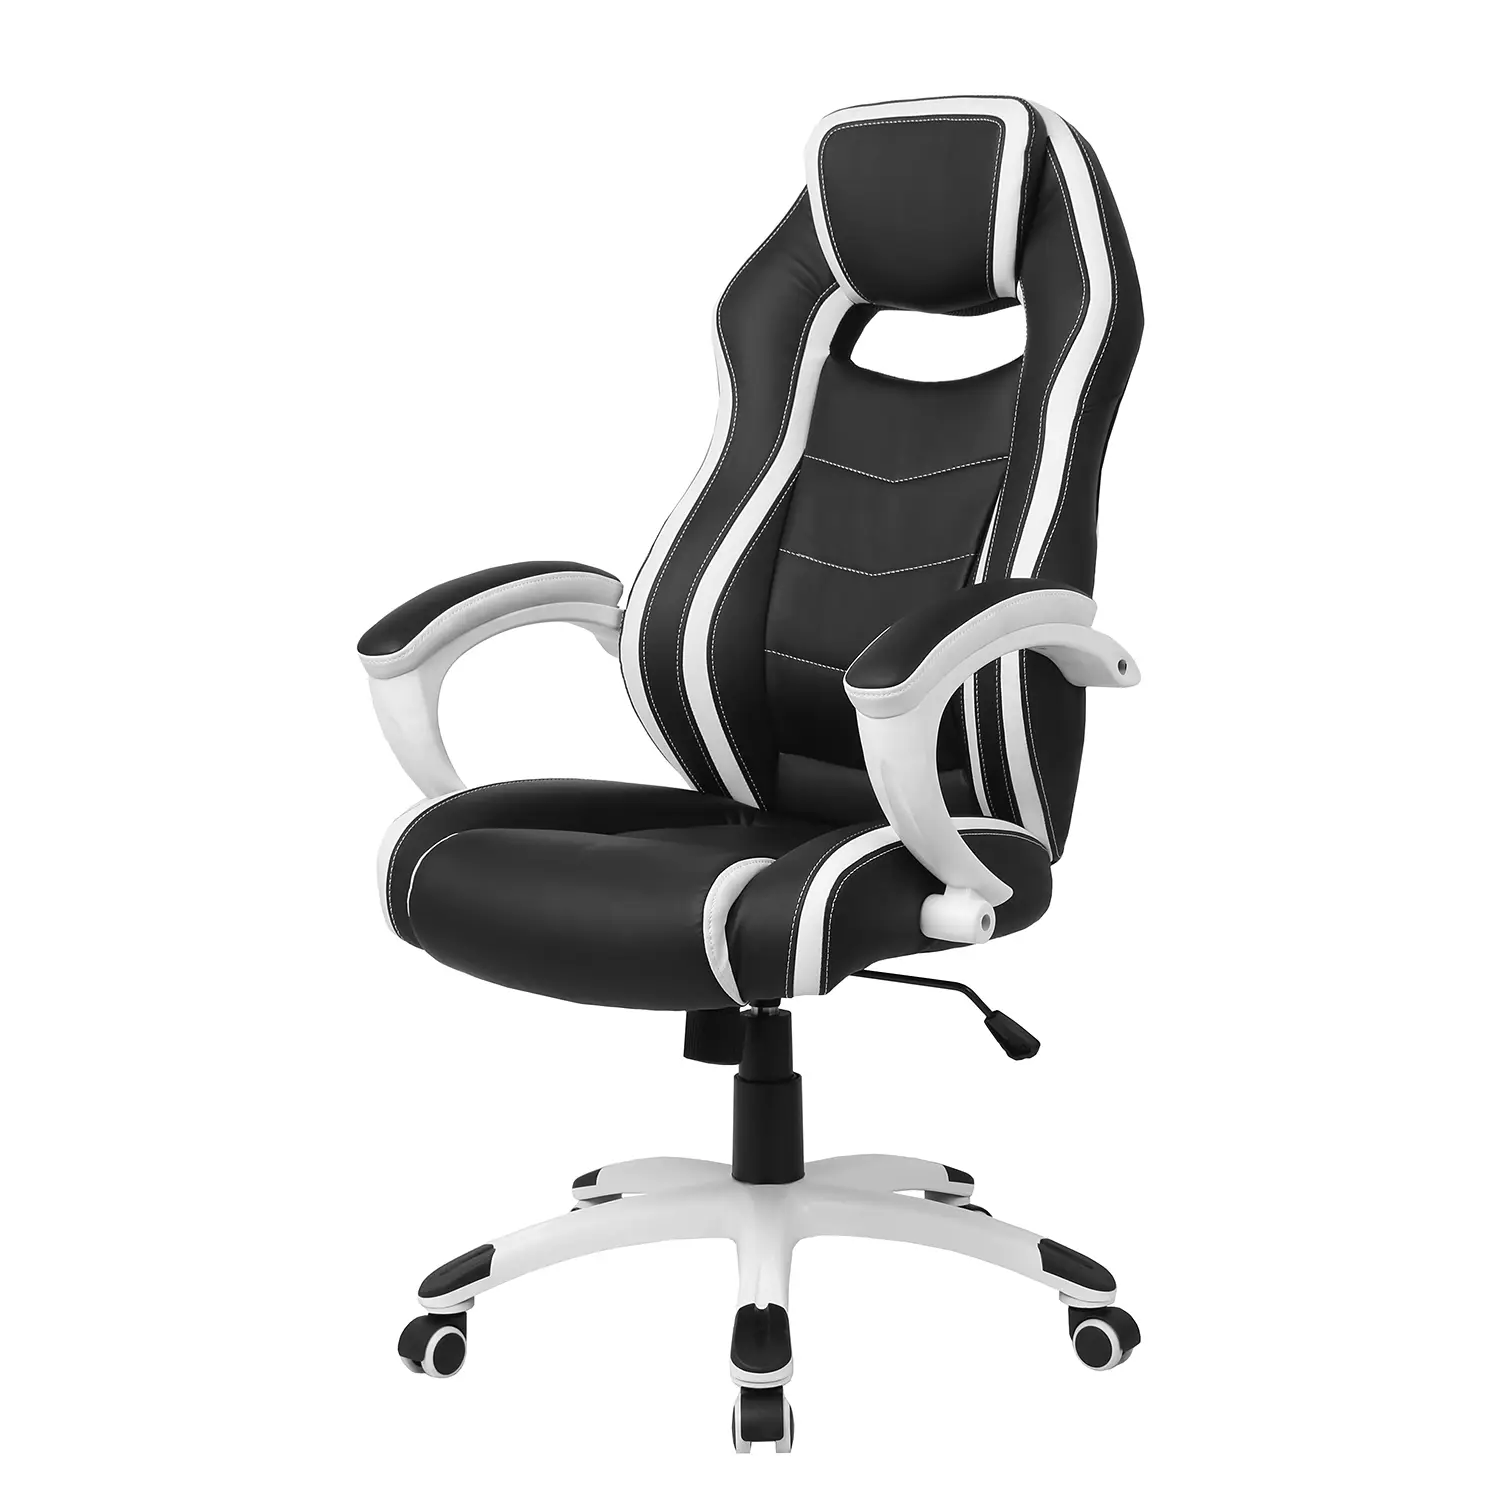 Meon Gaming Chair